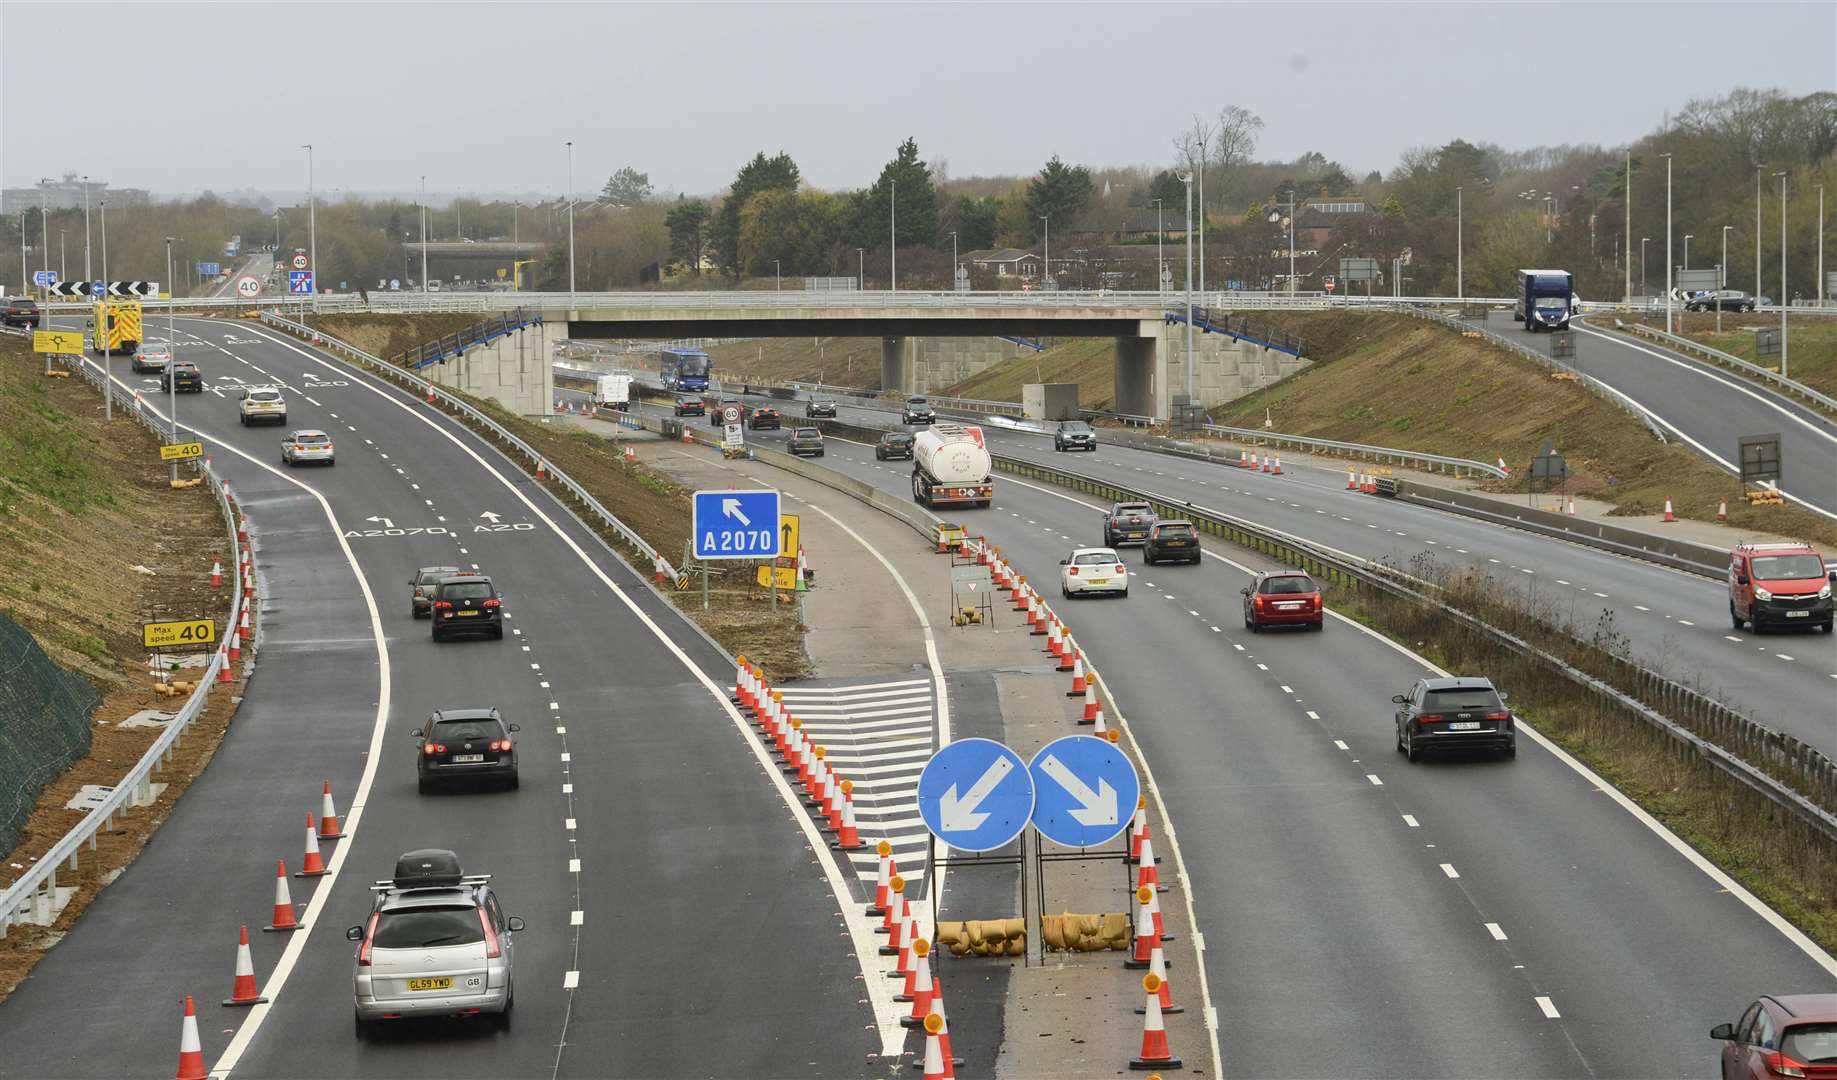 Junction 10a opened to traffic in October